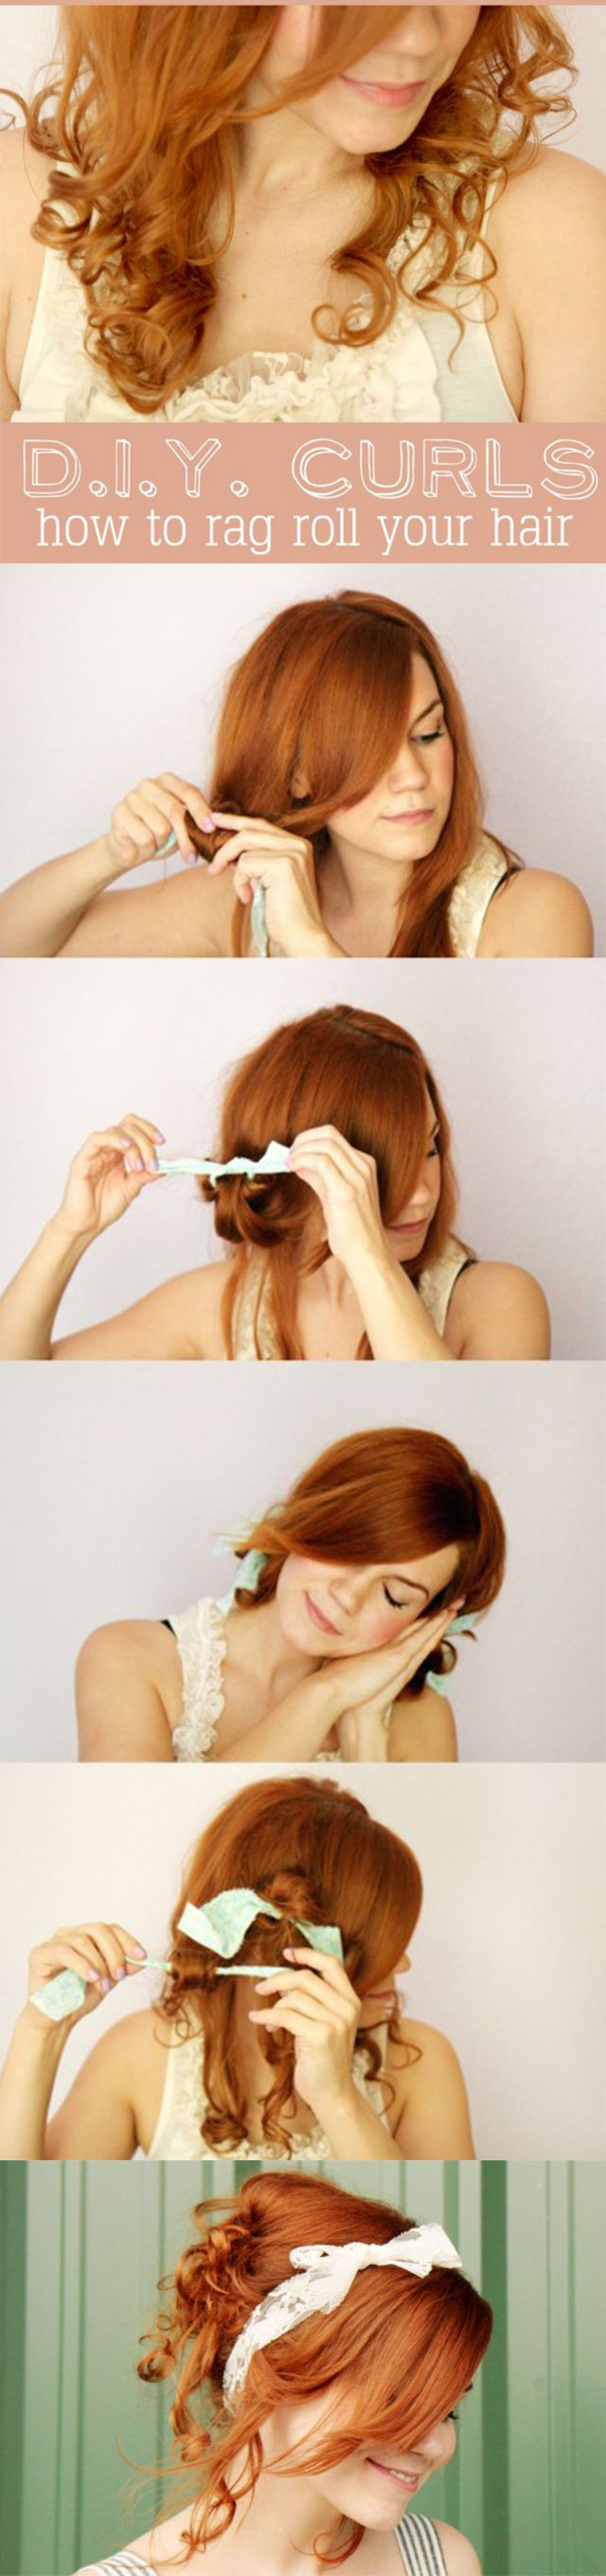 HOW TO RAG ROLL YOUR HAIR